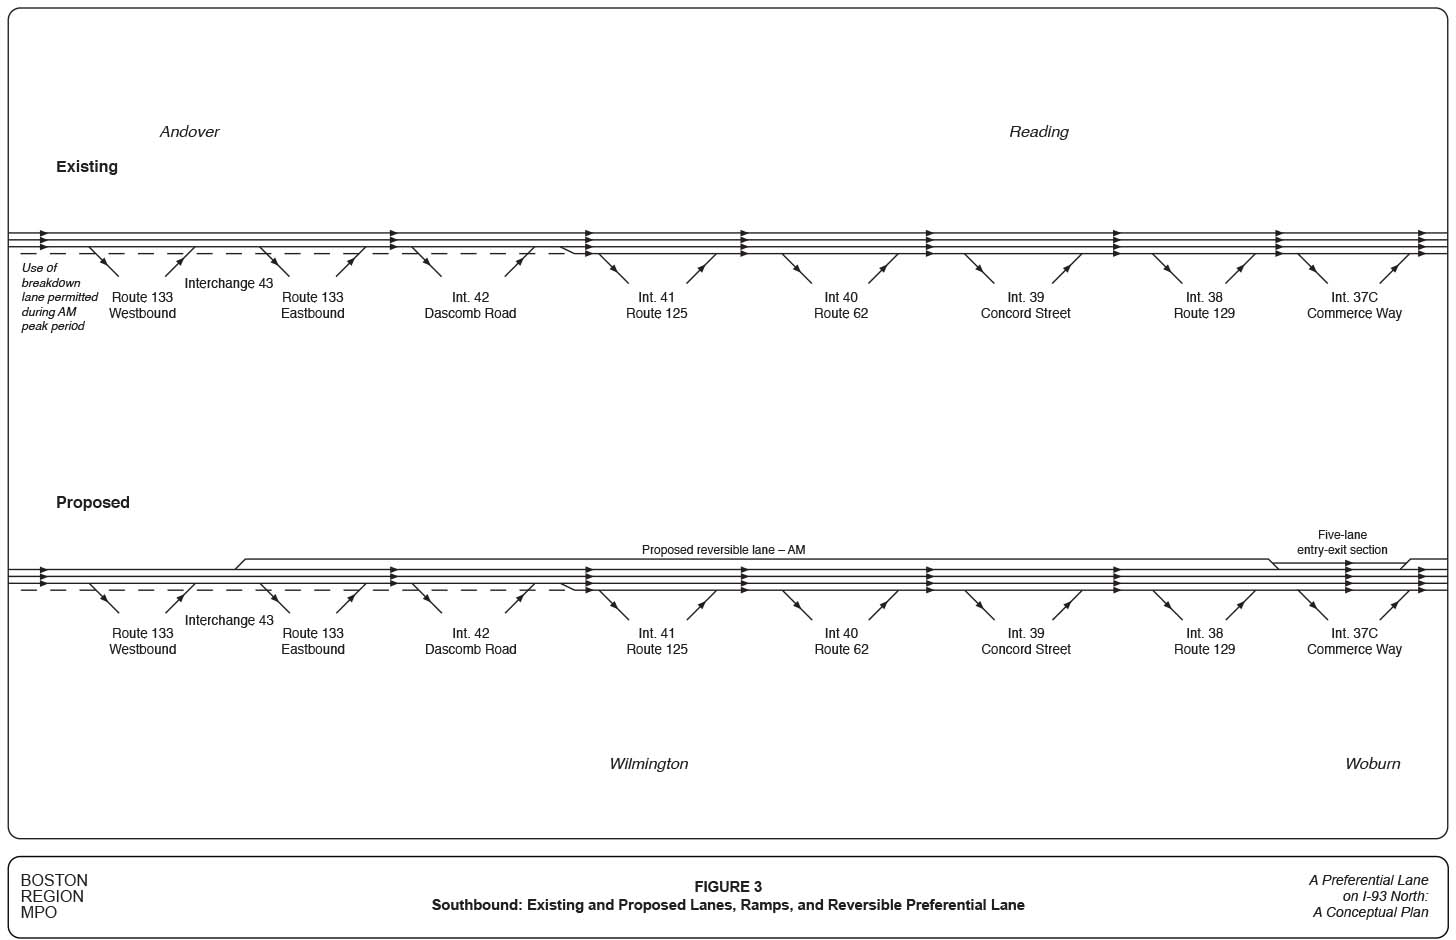 FIGURE 3. Southbound: Existing and Proposed Lanes, Ramps, and Reversible Preferential Lane
Figure 3 presents the proposed preferential lane system in schematic format, which shows existing and proposed southbound lanes and ramps as they would be utilized during the AM peak period.
